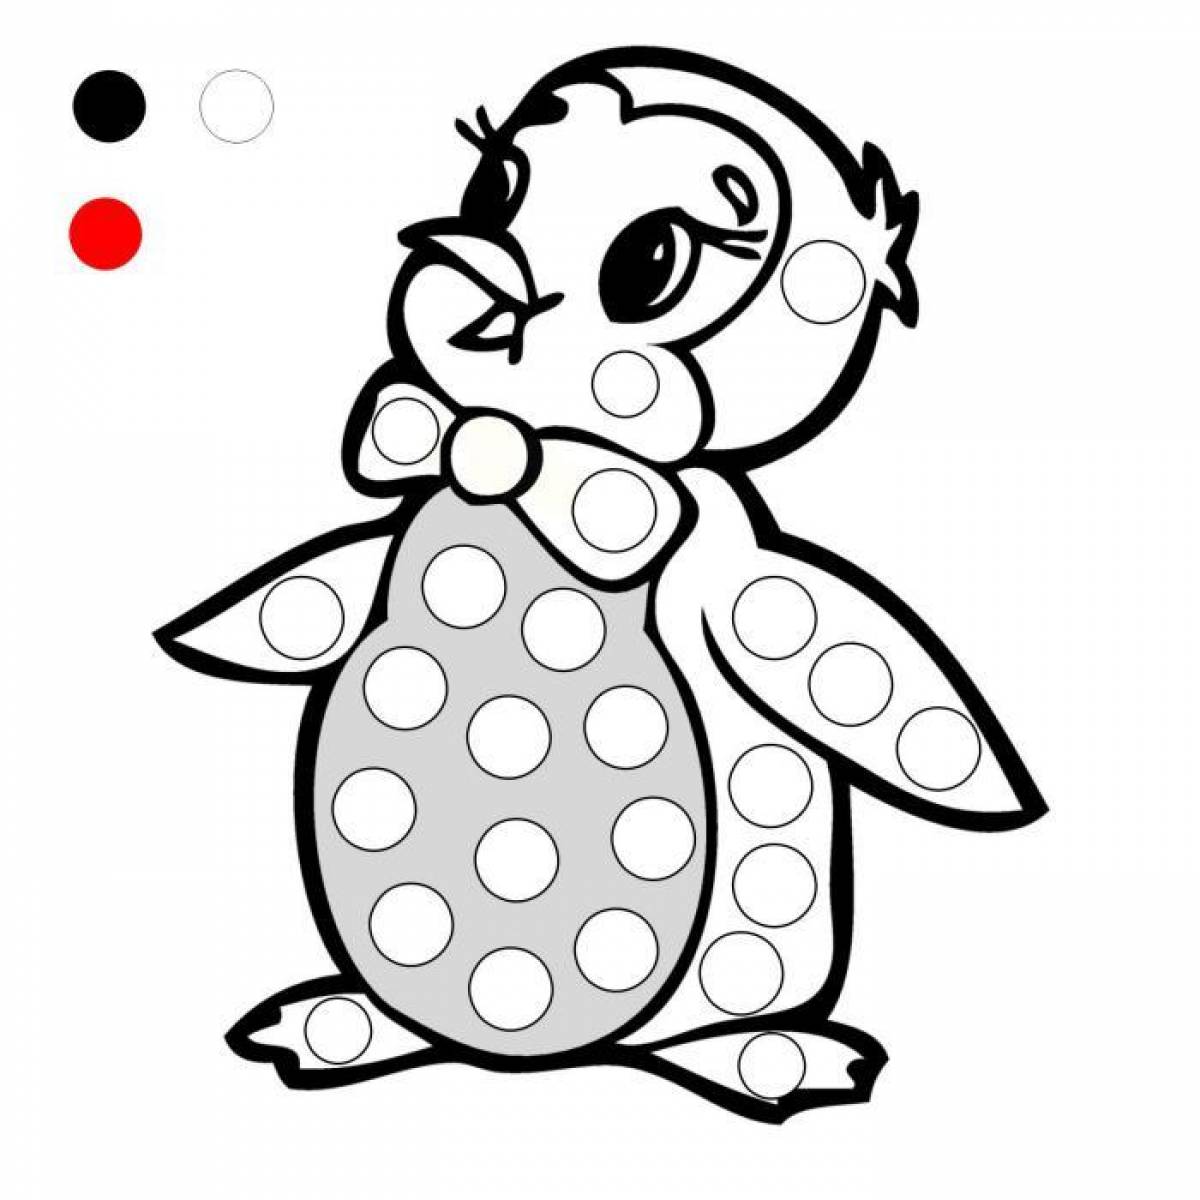 Penguin coloring pages